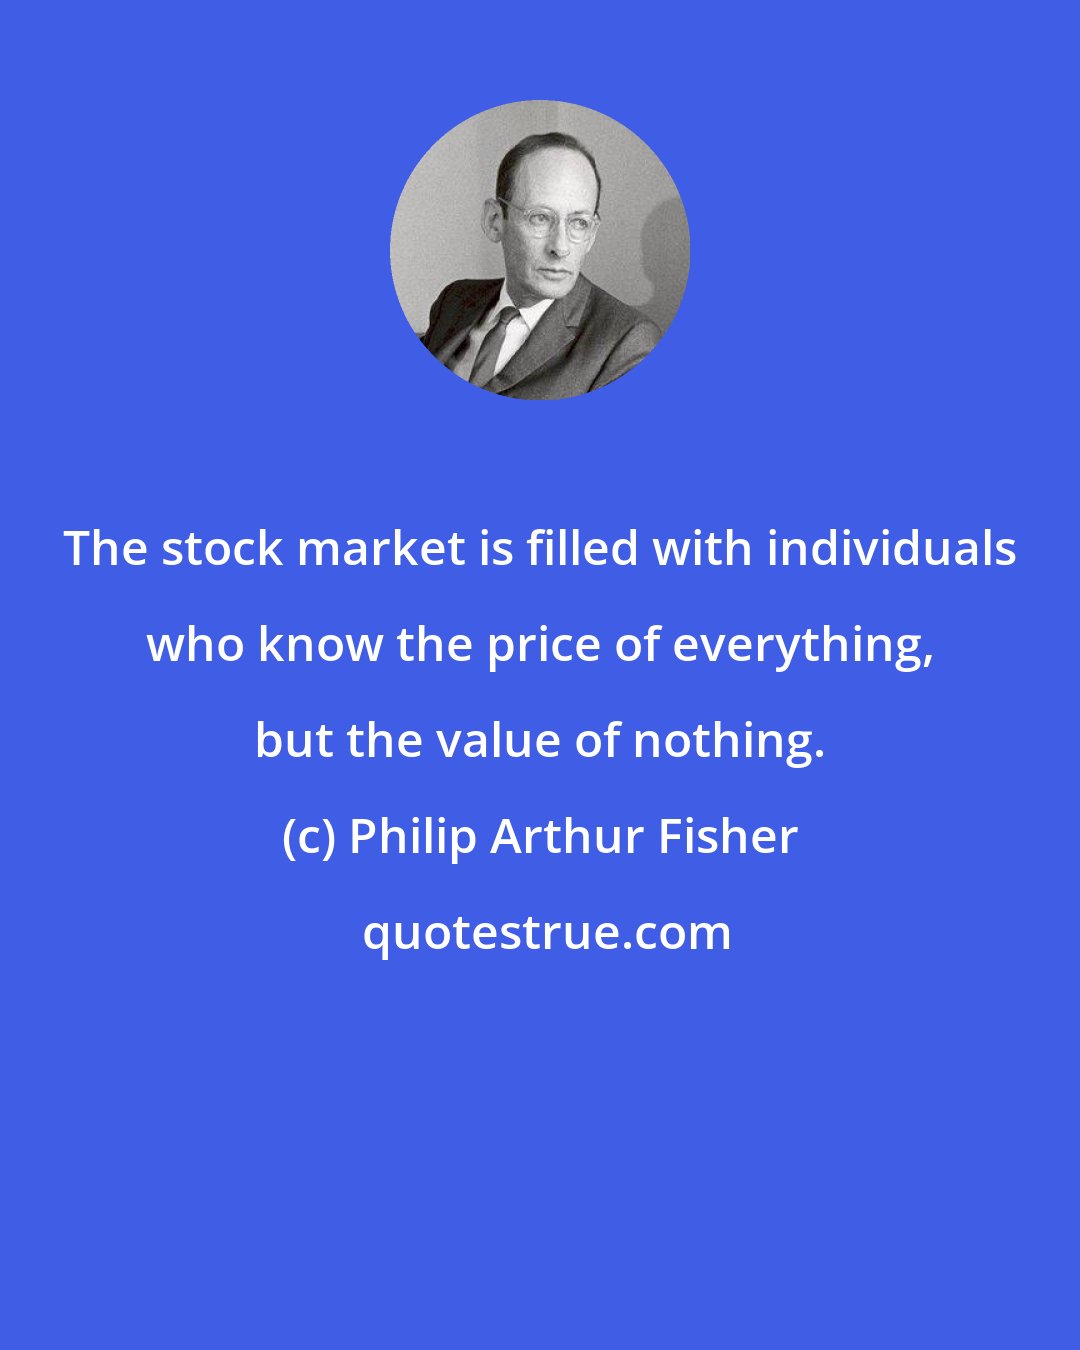 Philip Arthur Fisher: The stock market is filled with individuals who know the price of everything, but the value of nothing.